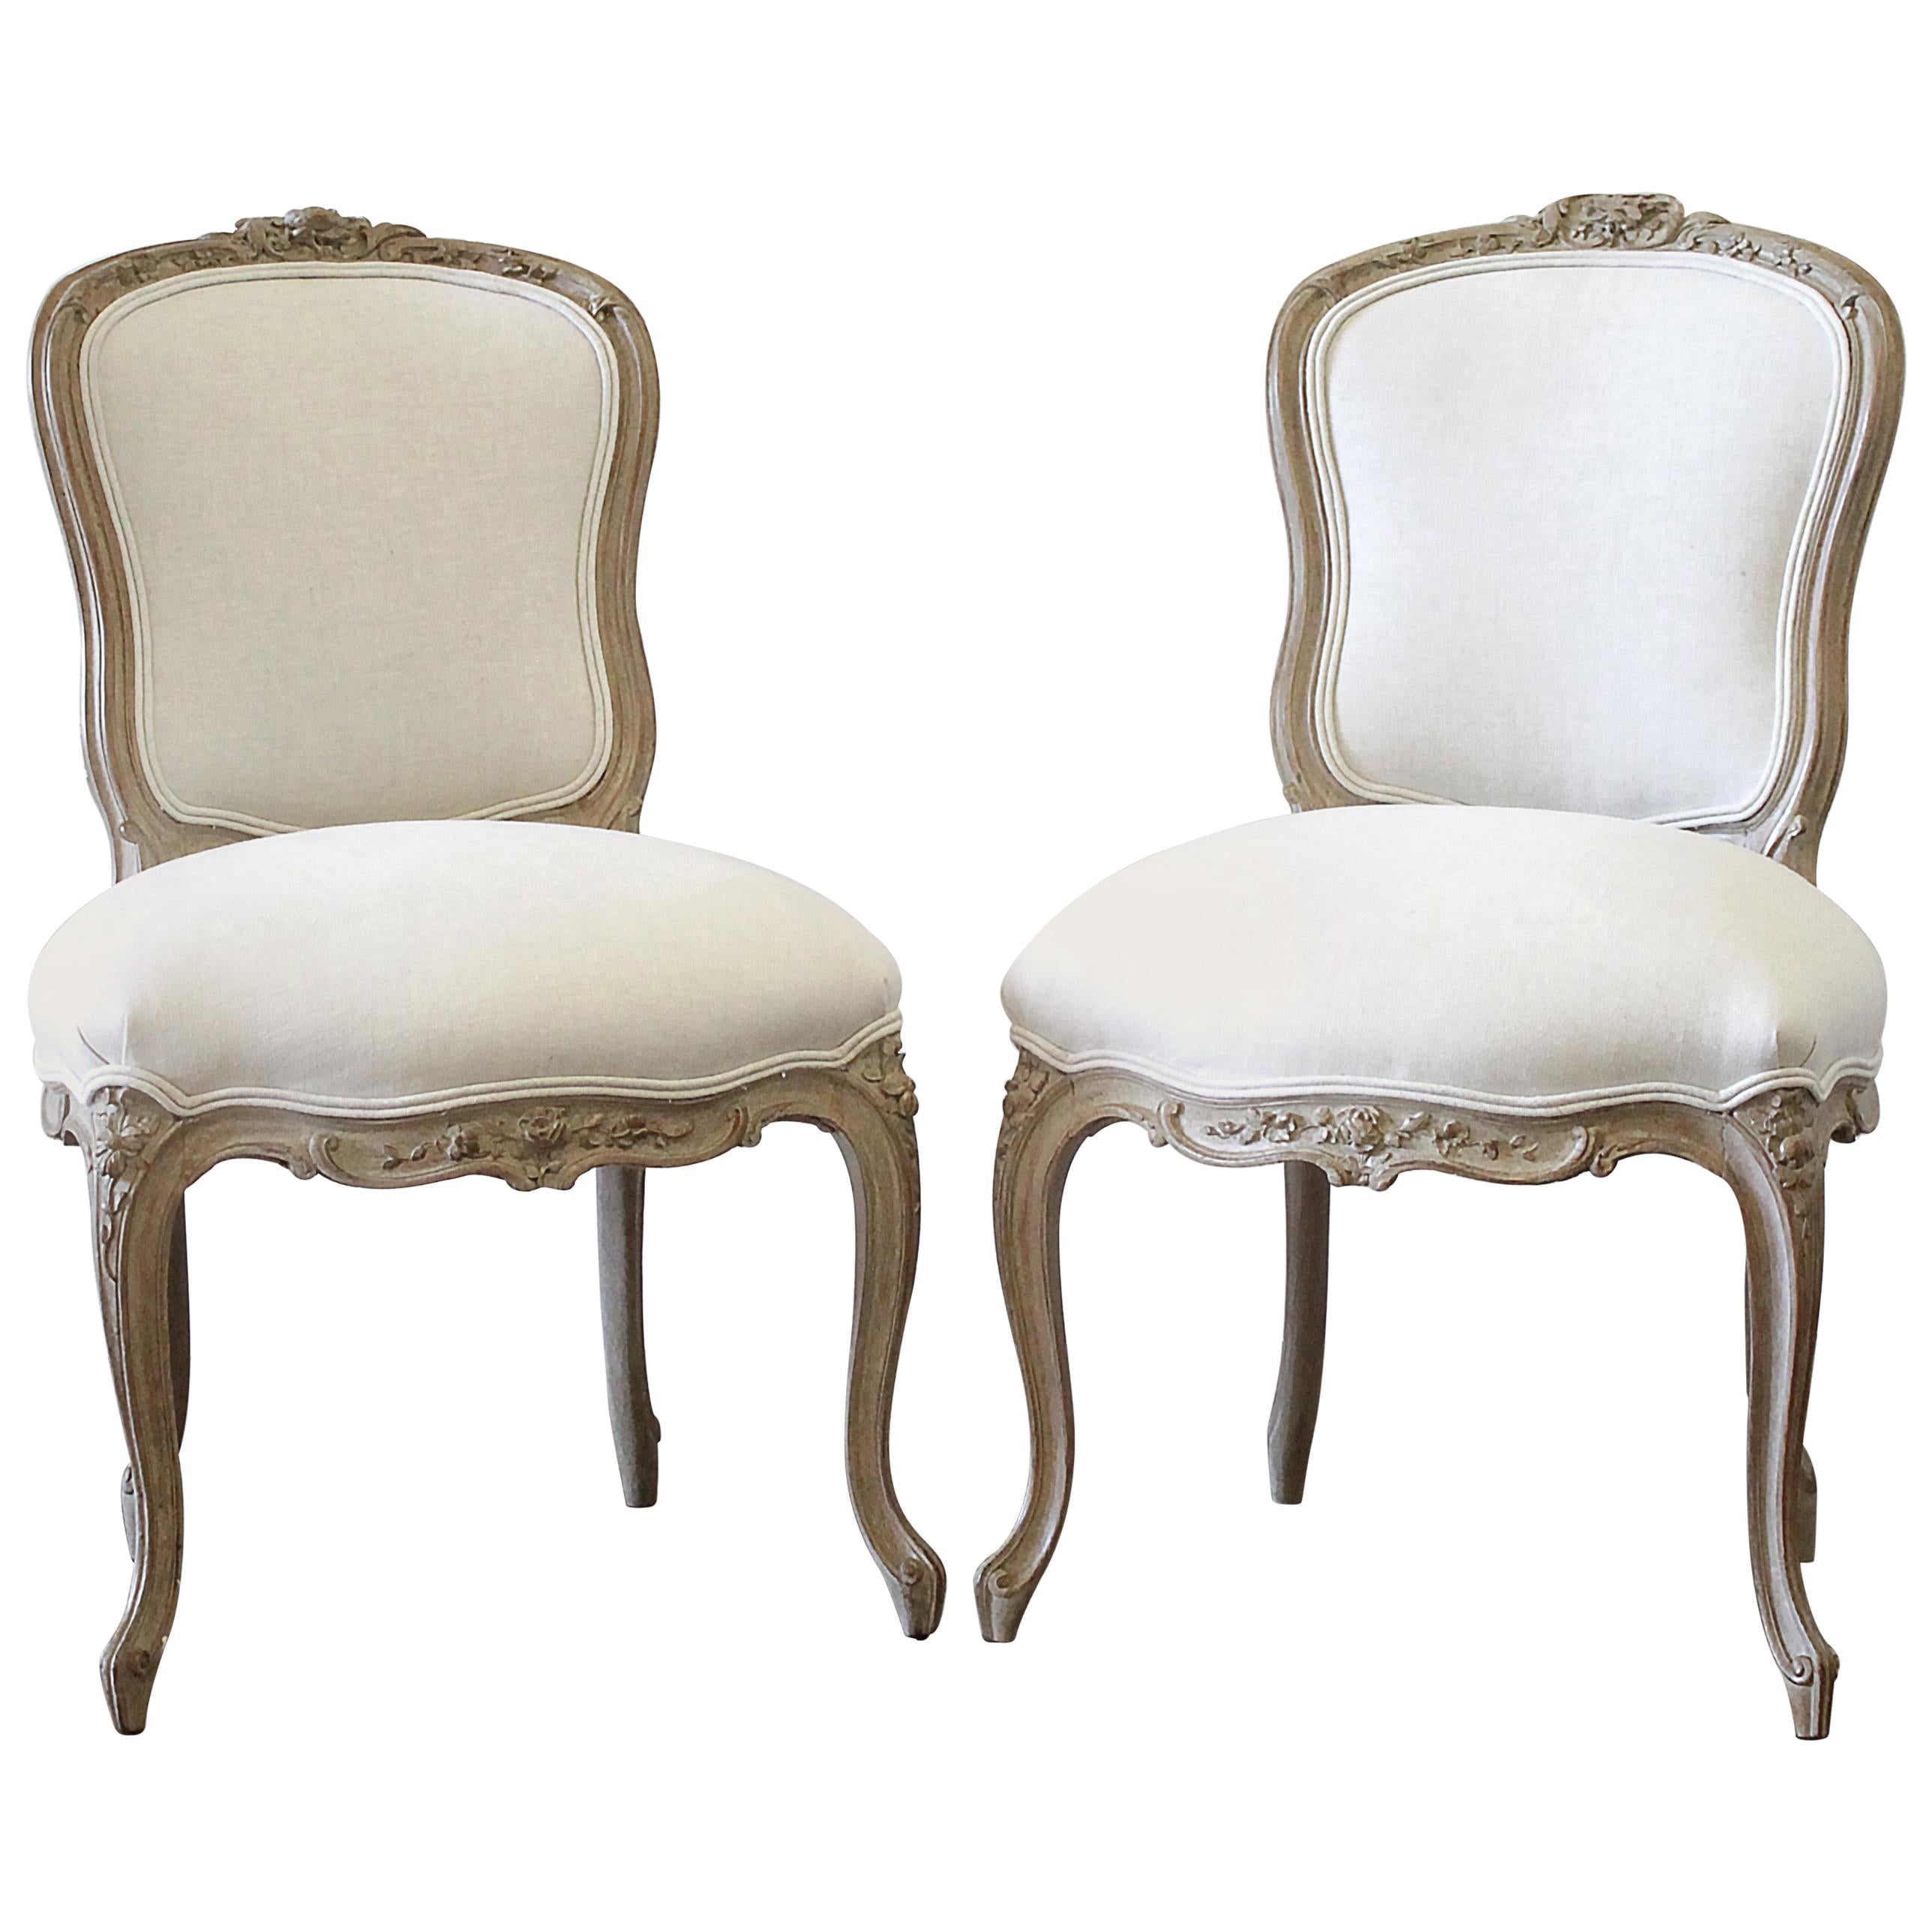 20th Century Louis XV Style Carved Wood and Linen Upholstered Chairs